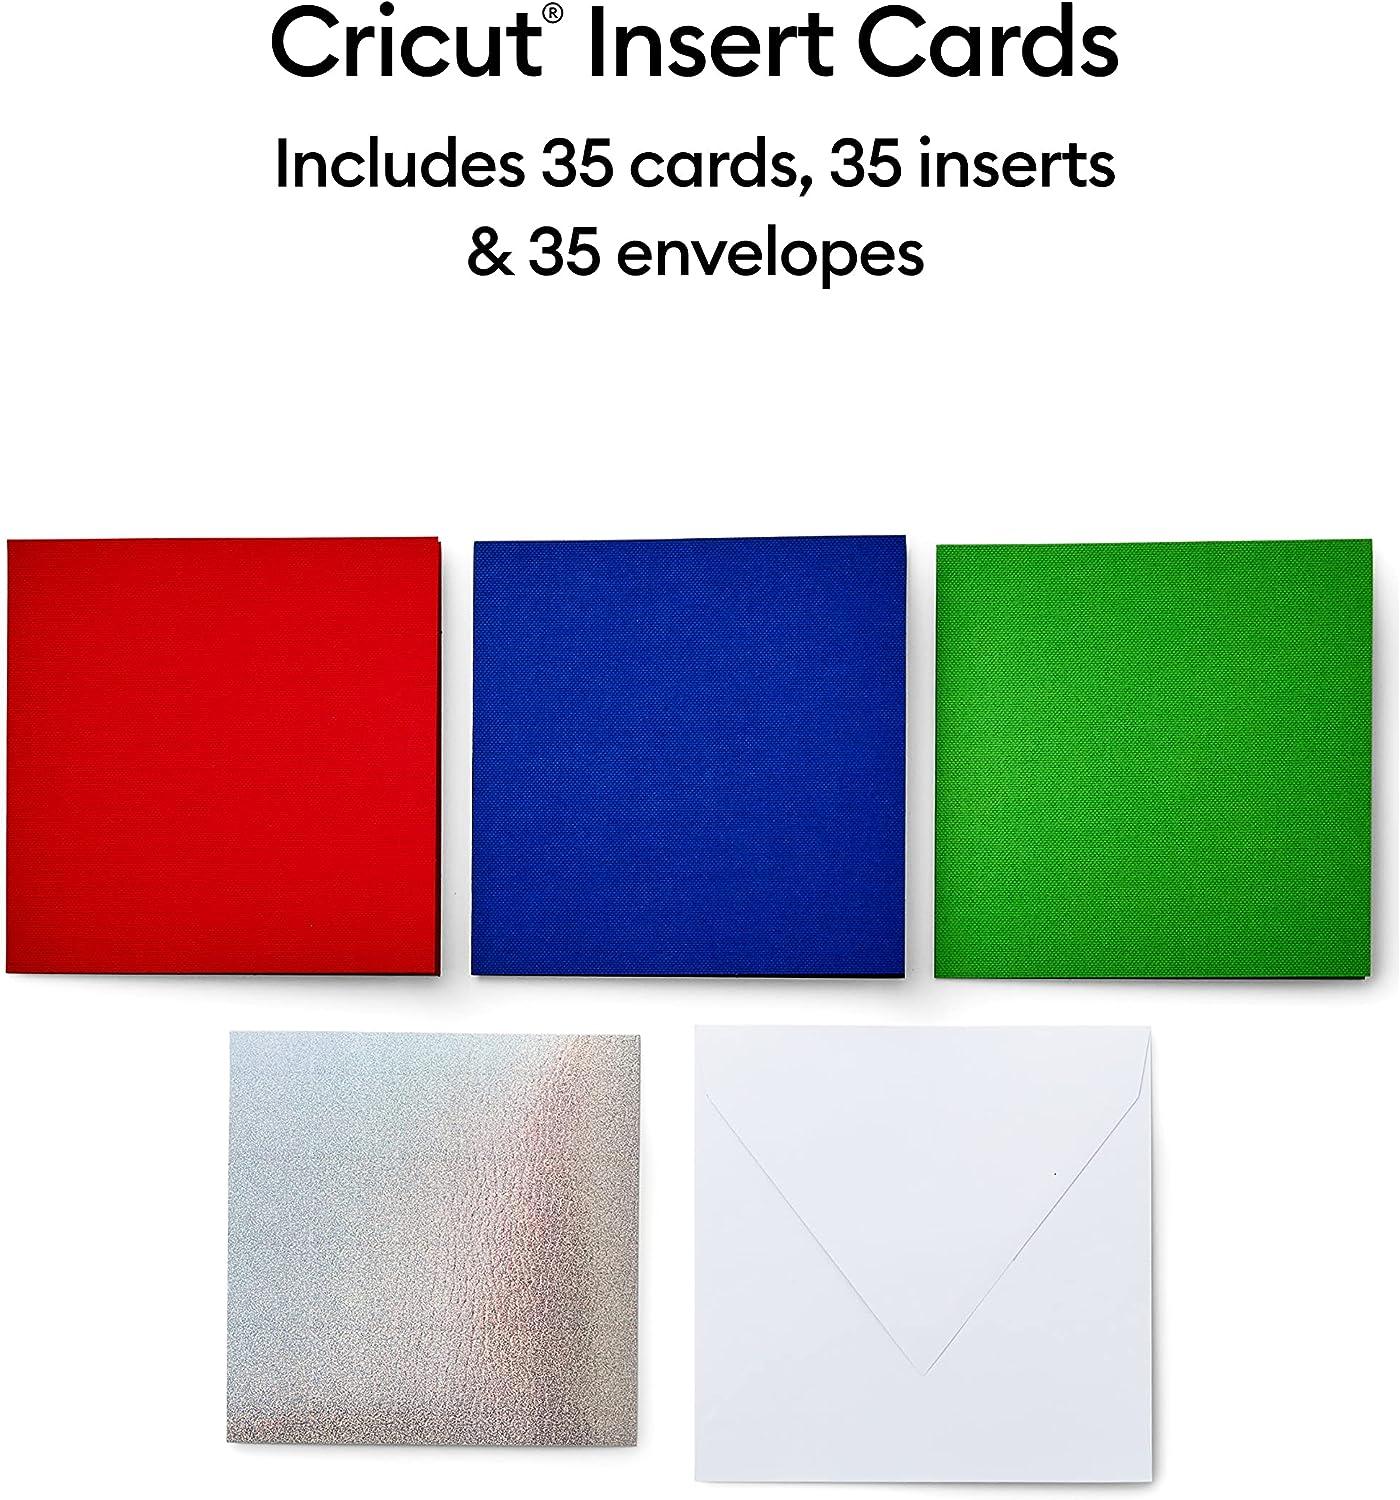 Cricut Insert Cards R40, Create Depth-Filled Birthday Cards, Thank You  Cards, Custom Greeting Cards at Home, Compatible with Cricut  Joy/Maker/Explore Machines, Princess Sampler (30 ct)